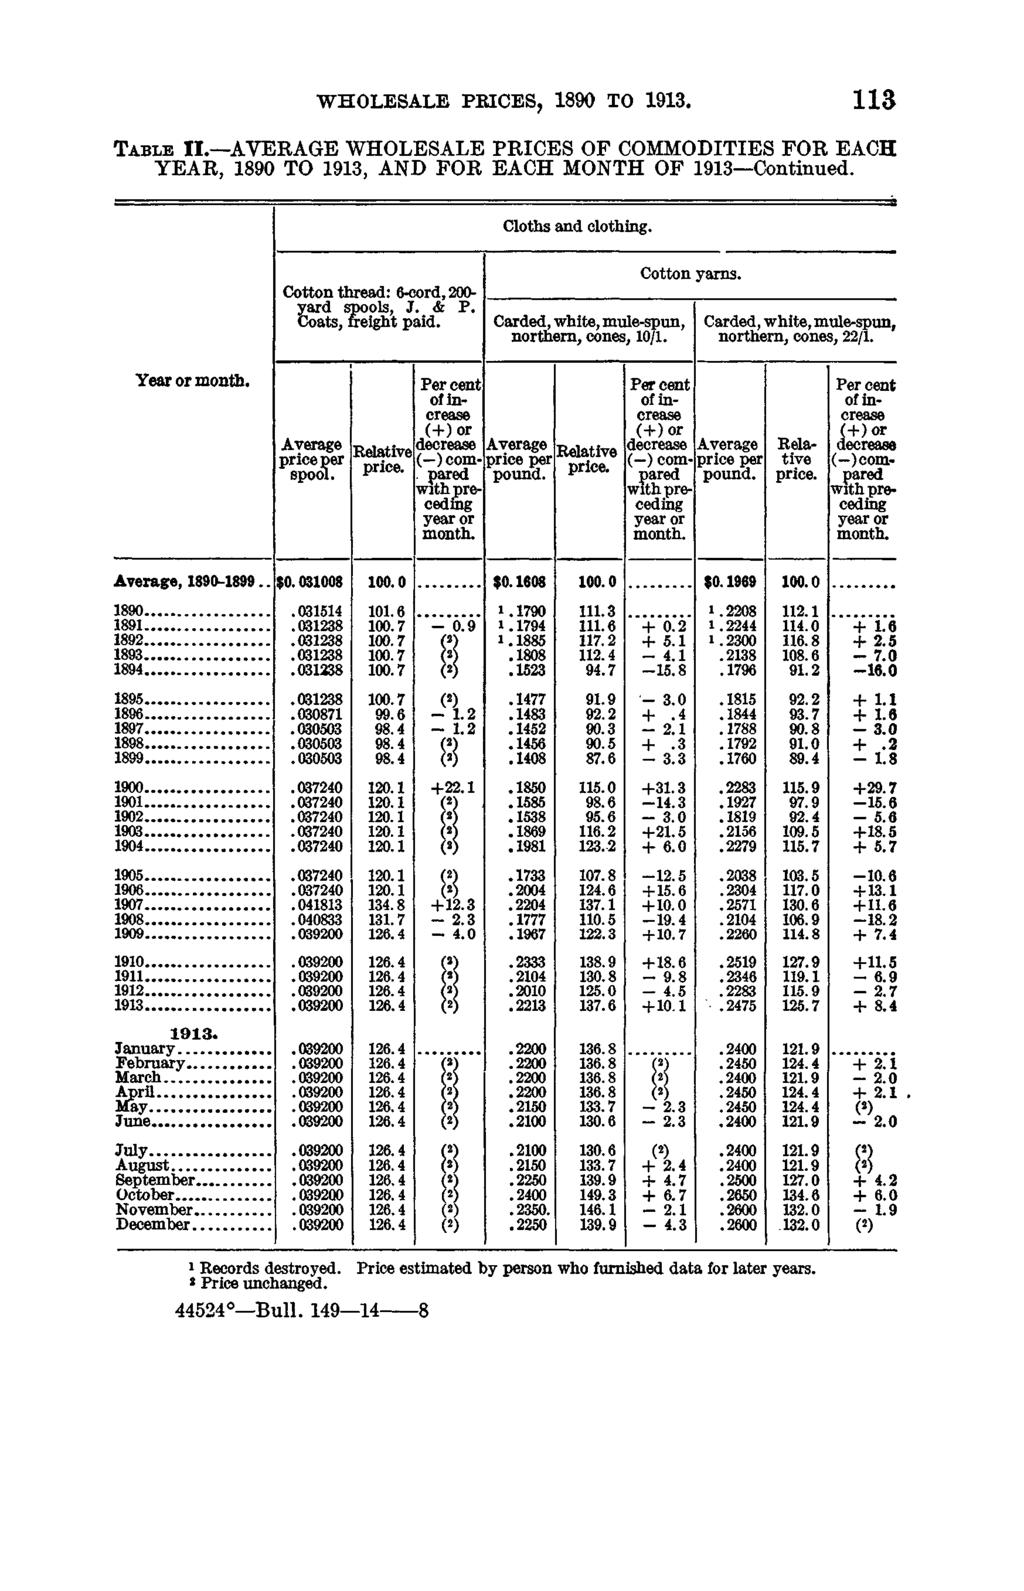 W H O LESALE PRICES, 1890 TO 1913. 1 1 3 Table II. AVERAGE WHOLESALE PRICES OF COMMODITIES FOR EACH YEAR, 1890 TO 1913, AND FOR EACH MONTH OF 1913 Continued. Cloths and clothing.